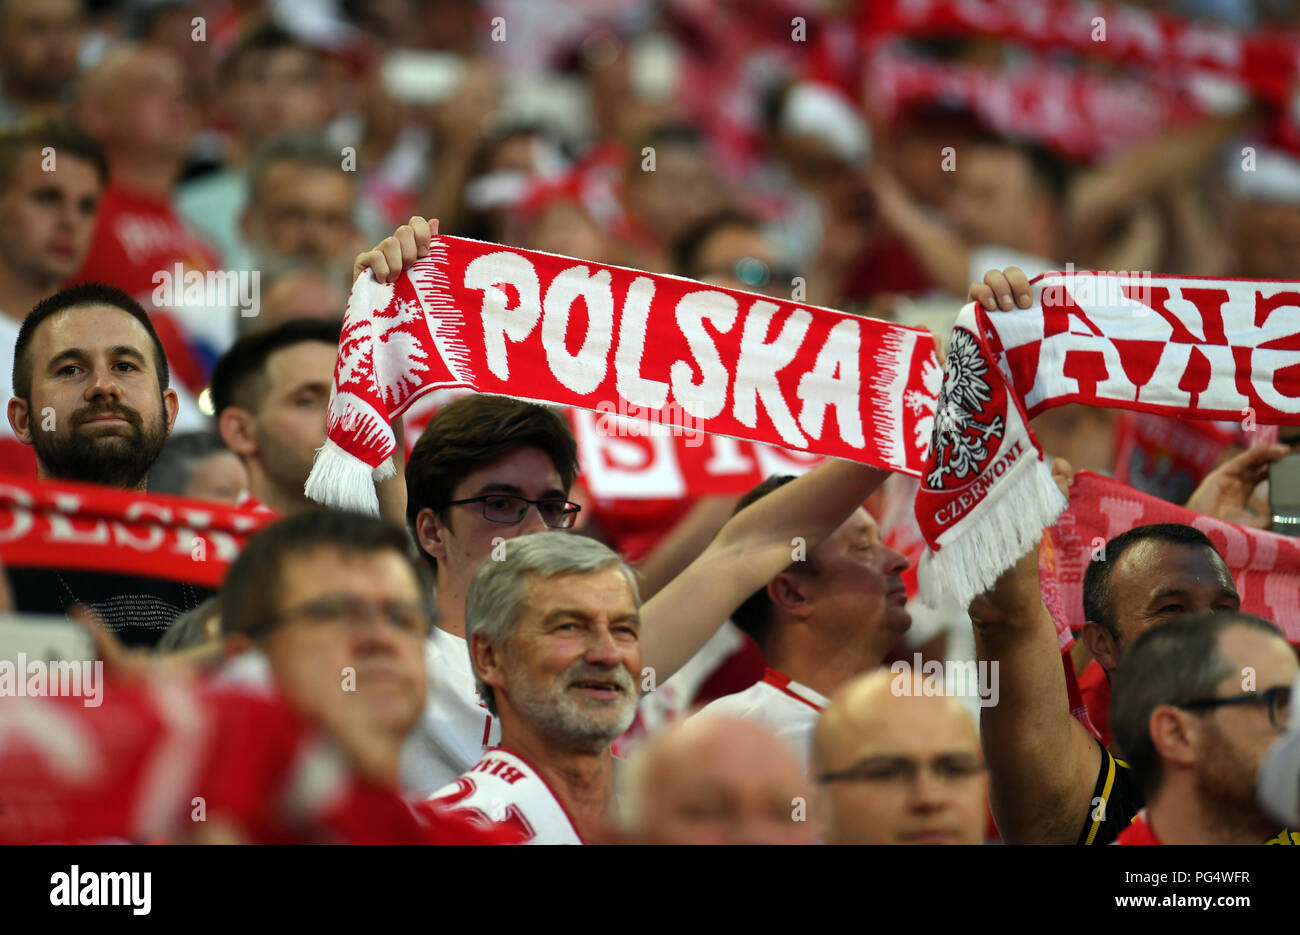 POZNAN, POLAND - MAY 08, 2018: International friendly game between Poland and Chile o/p: polish fans Stock Photo